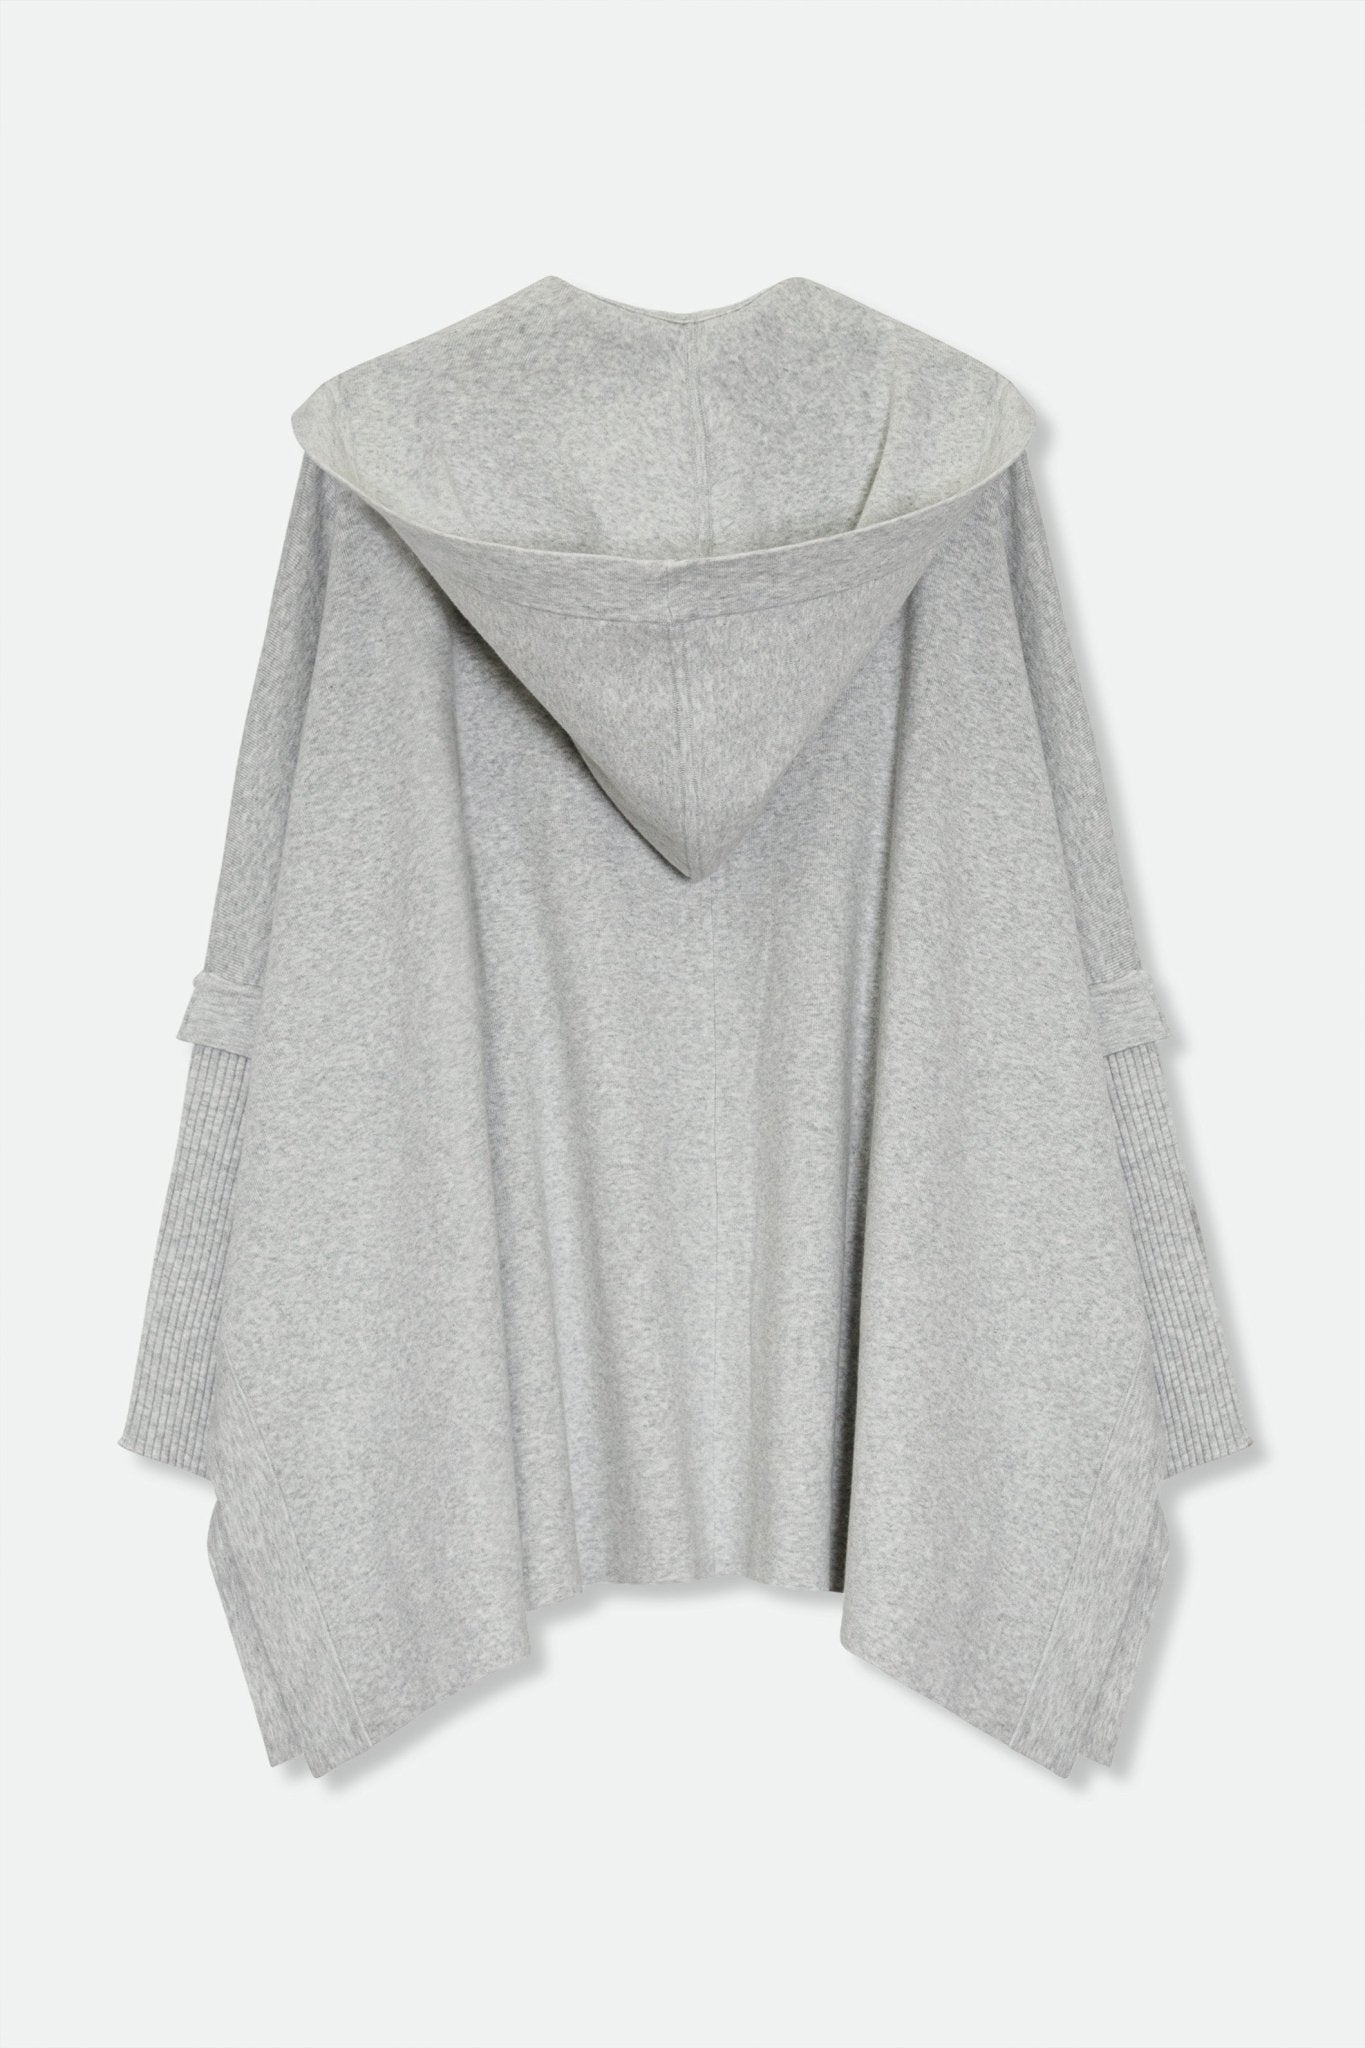 HARPER HOODED CAPE IN DOUBLE KNIT PIMA COTTON STRETCH ICE GREY HEATHER - Jarbo